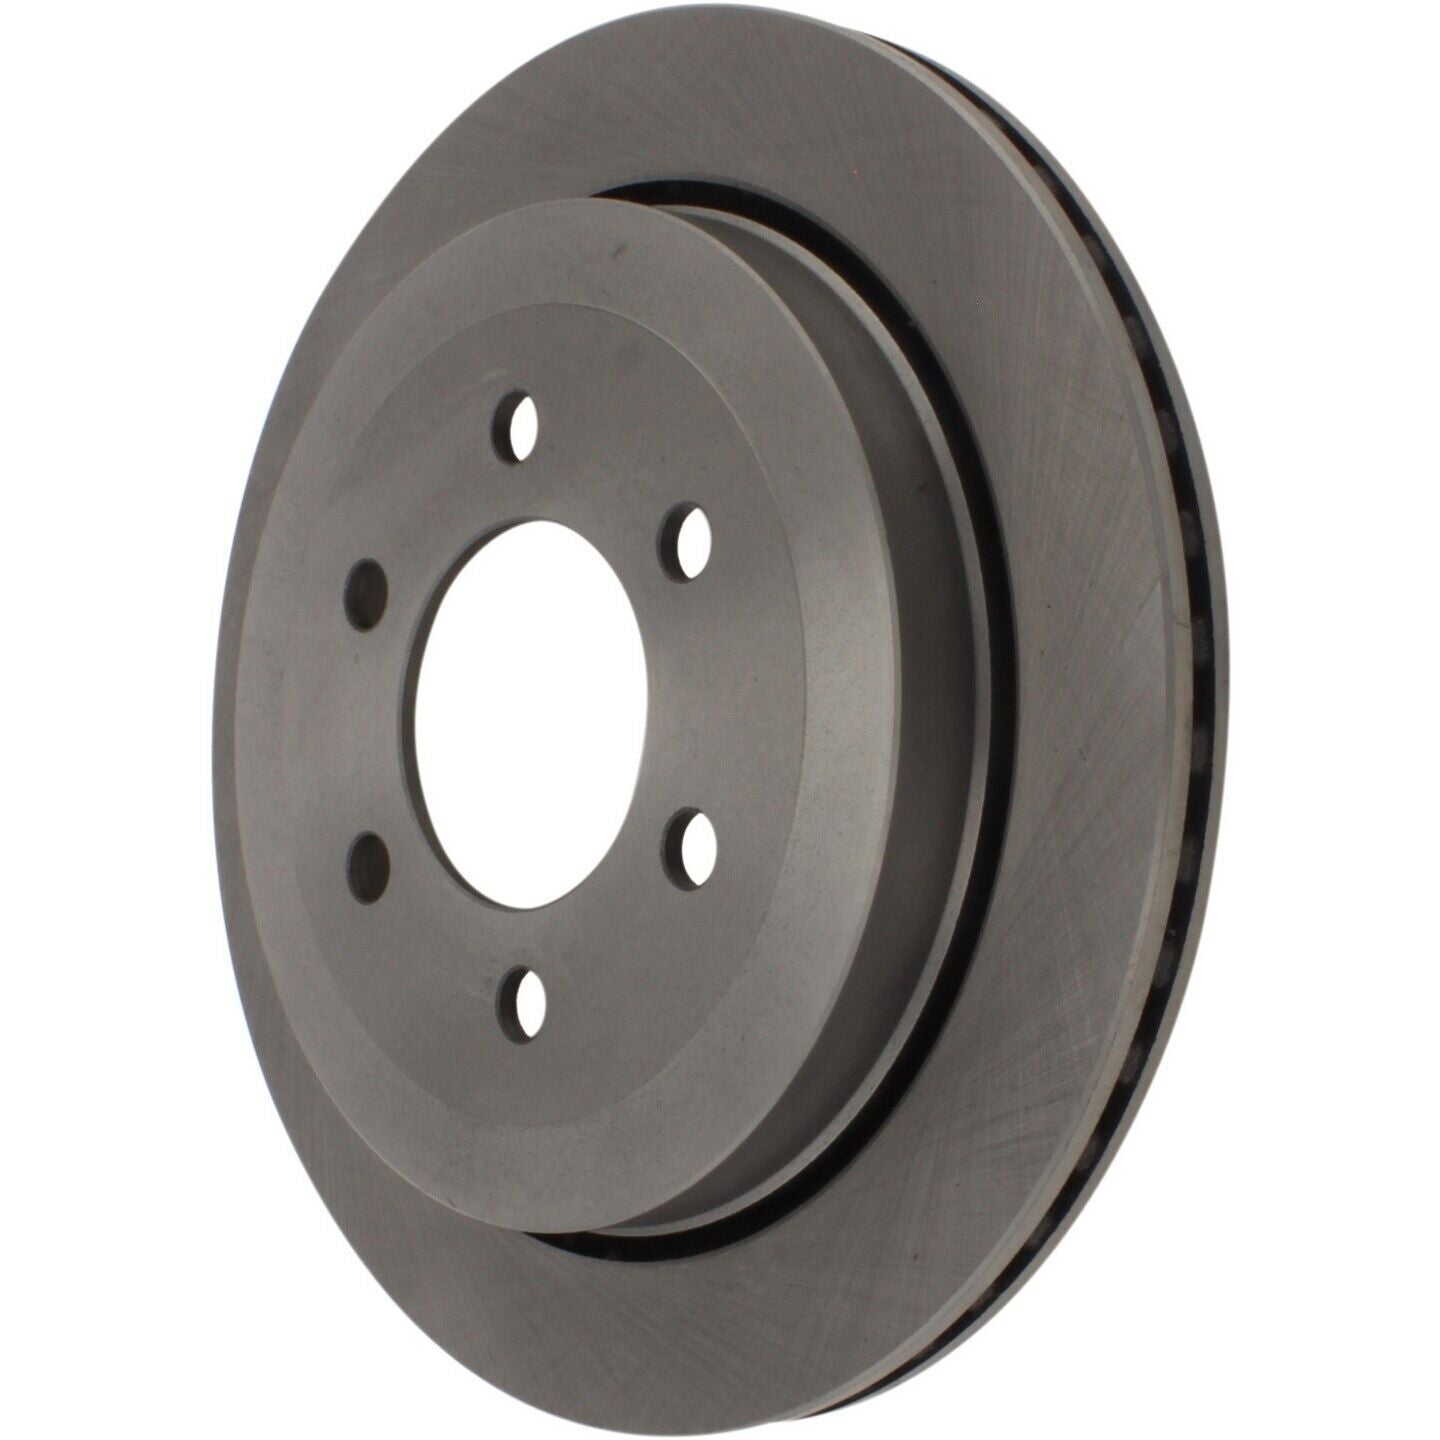 Centric Rear Disc Brake Rotor for Expedition, Navigator (121.65120)